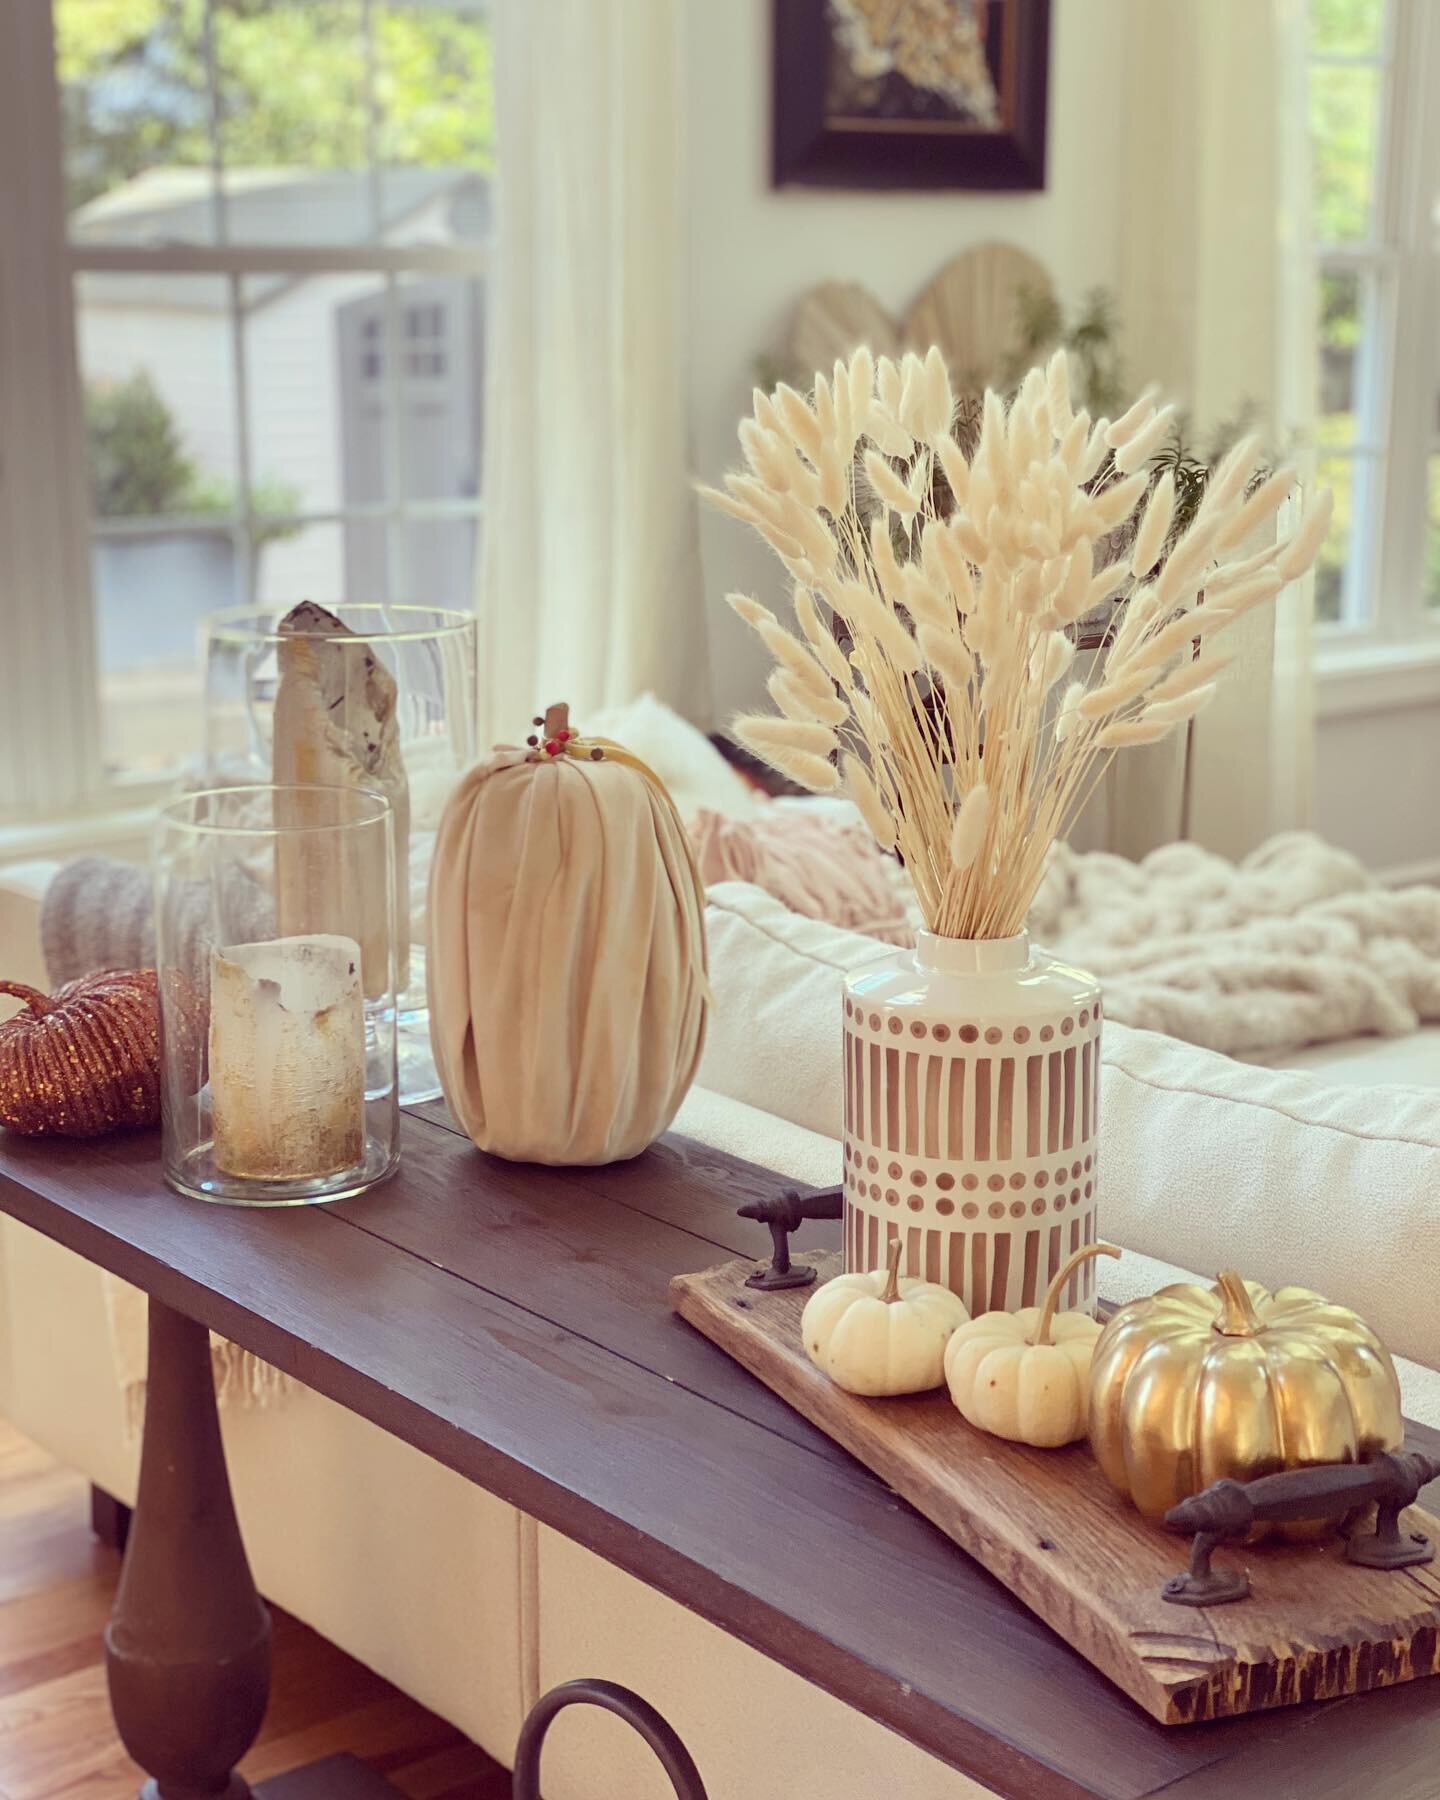 Just finished our photo shoot on this project styled perfectly for the Fall! Final reveal from my fabulous photographer @marypatcollinsphoto to follow! 

#fallstyle #halloweeninteriordesign  #showyourstyle #homeandgardenmagazine  #arlingtoninteriorde